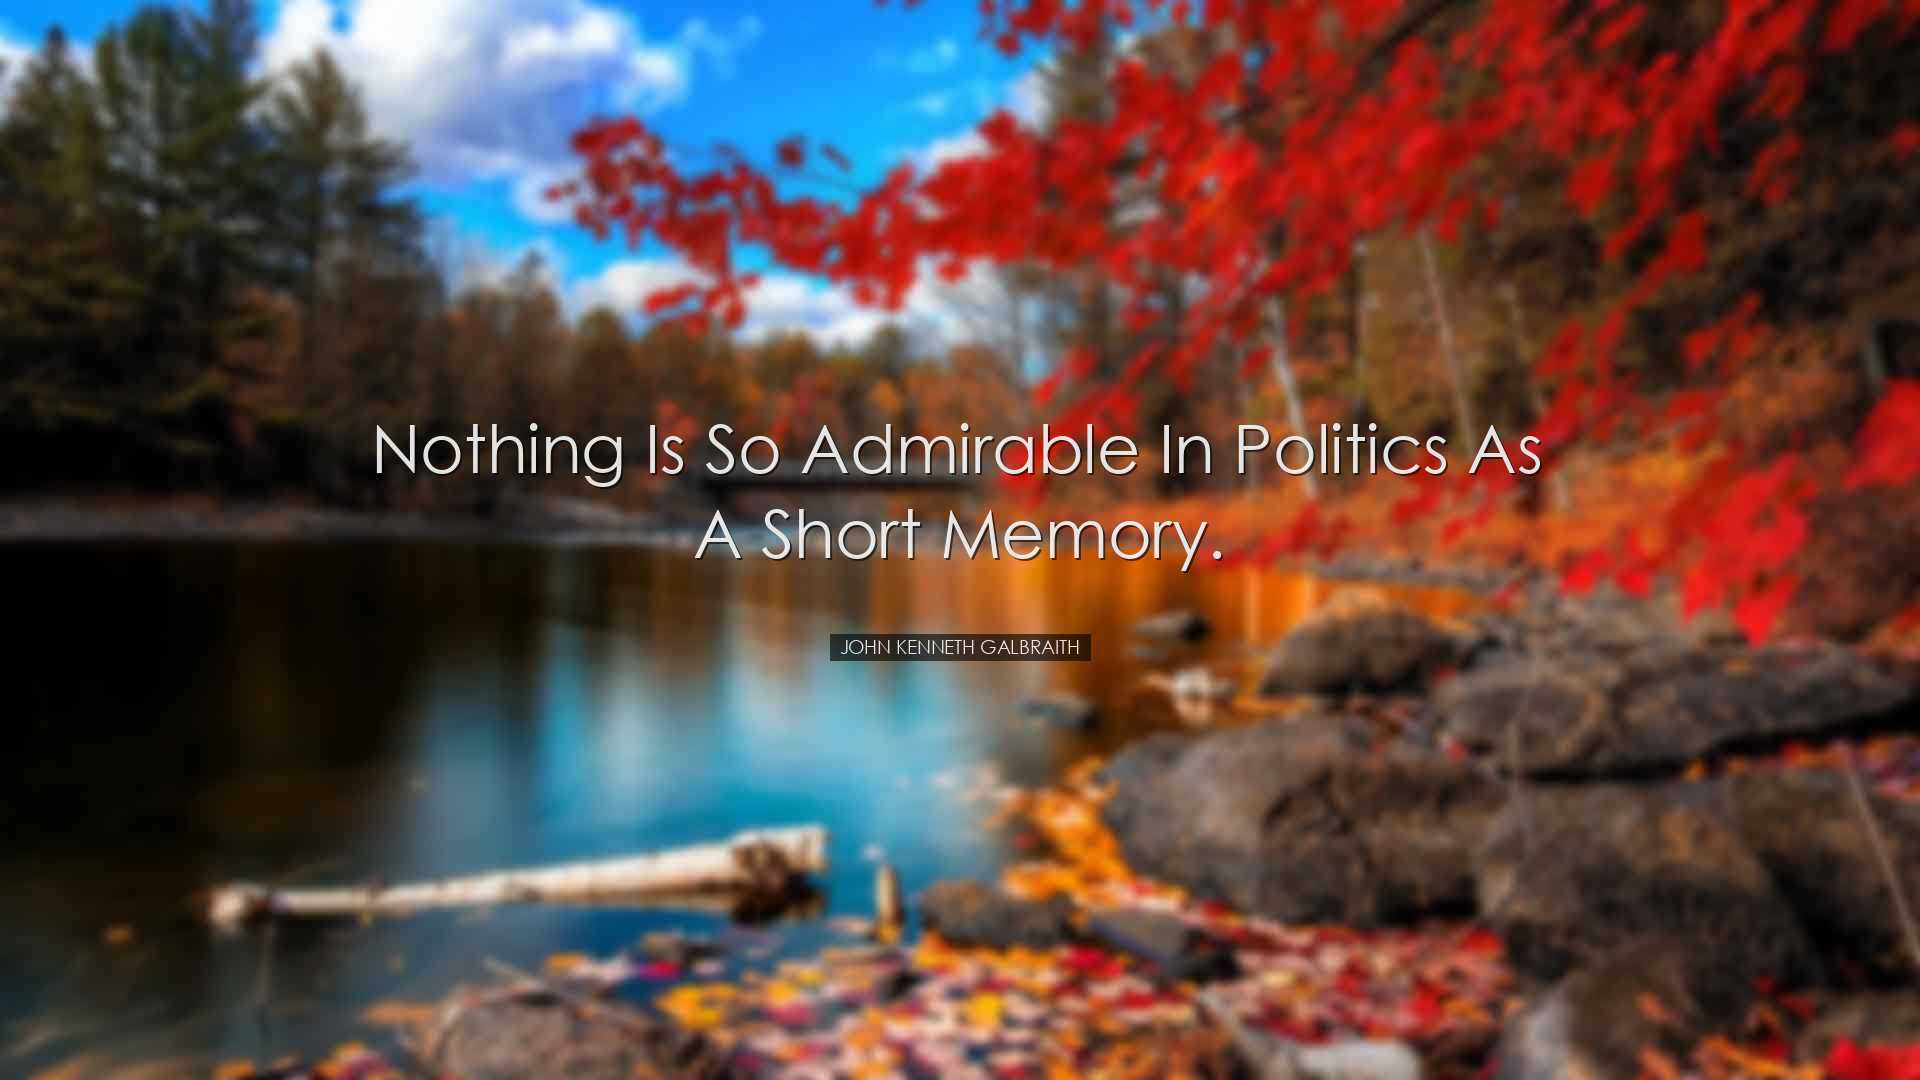 Nothing is so admirable in politics as a short memory. - John Kenn